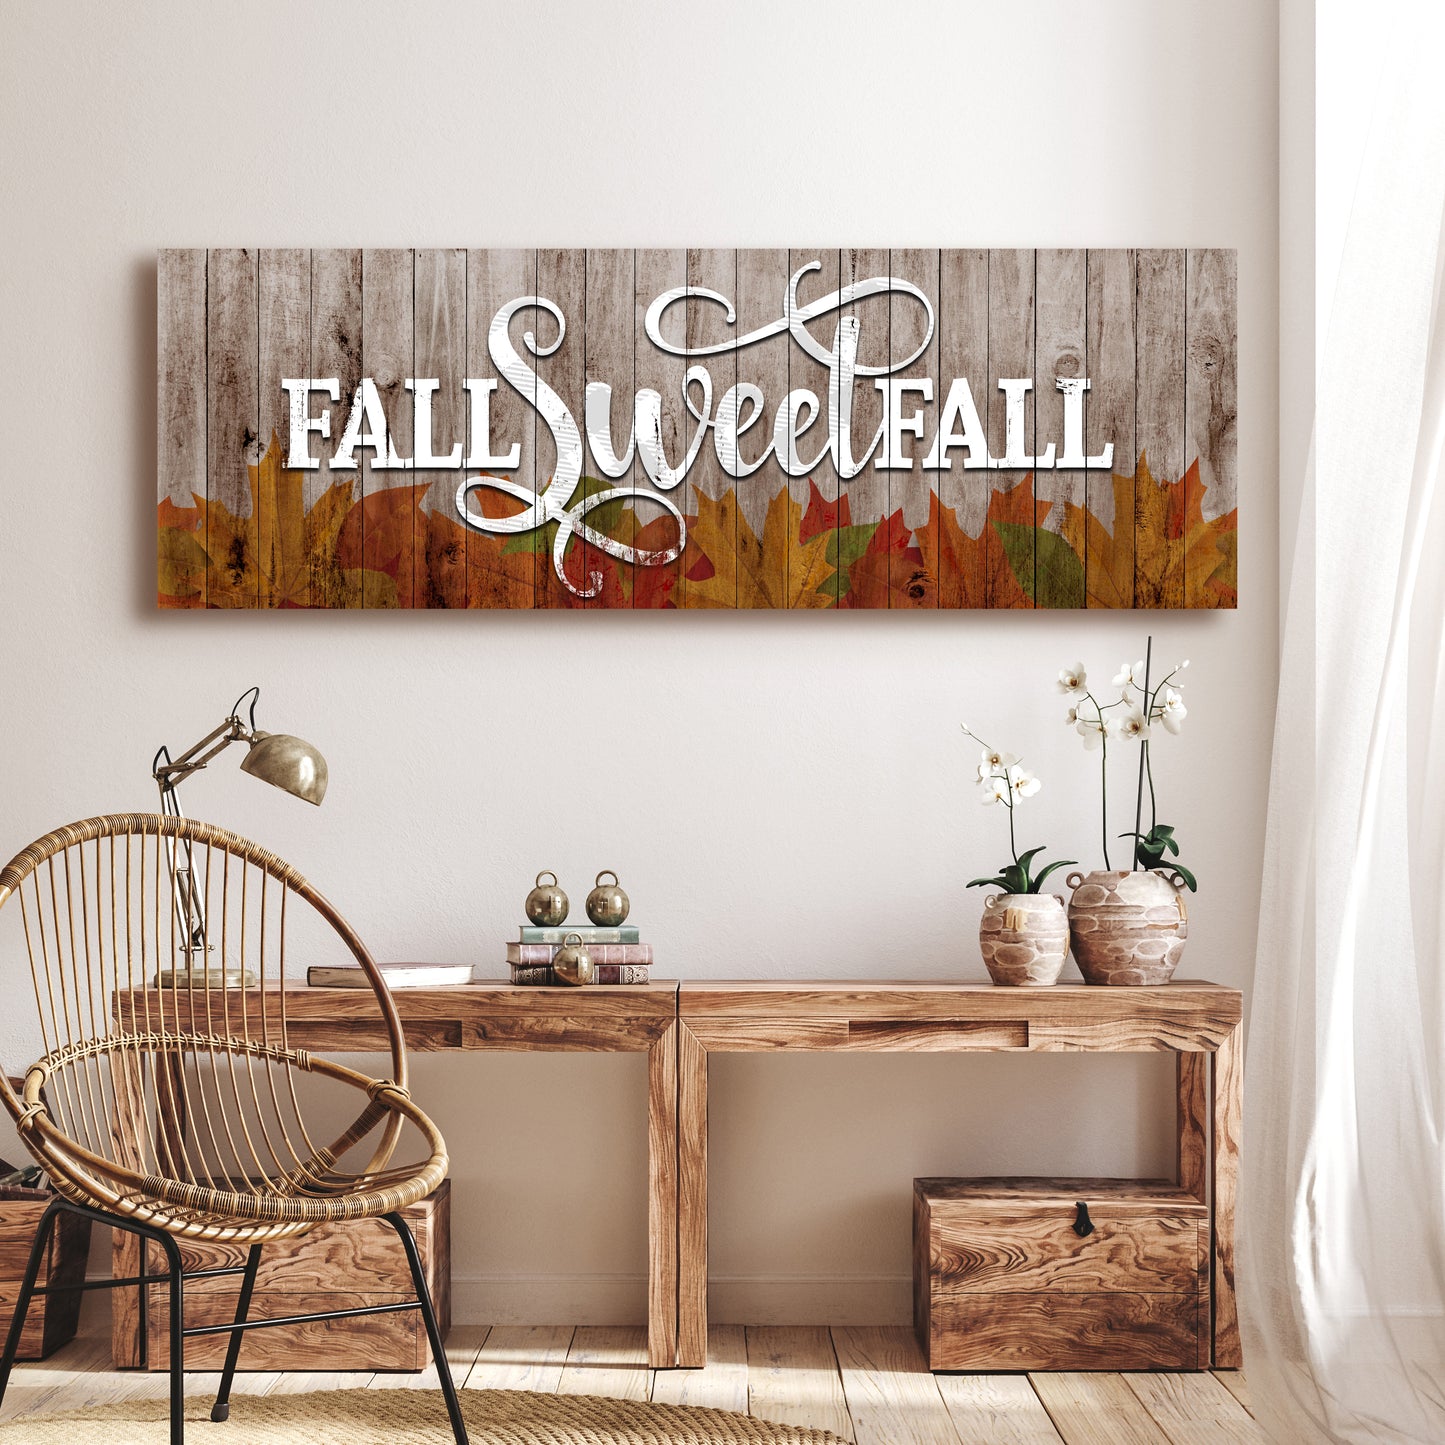 Fall Sweet Fall Sign - Image by Tailored Canvases